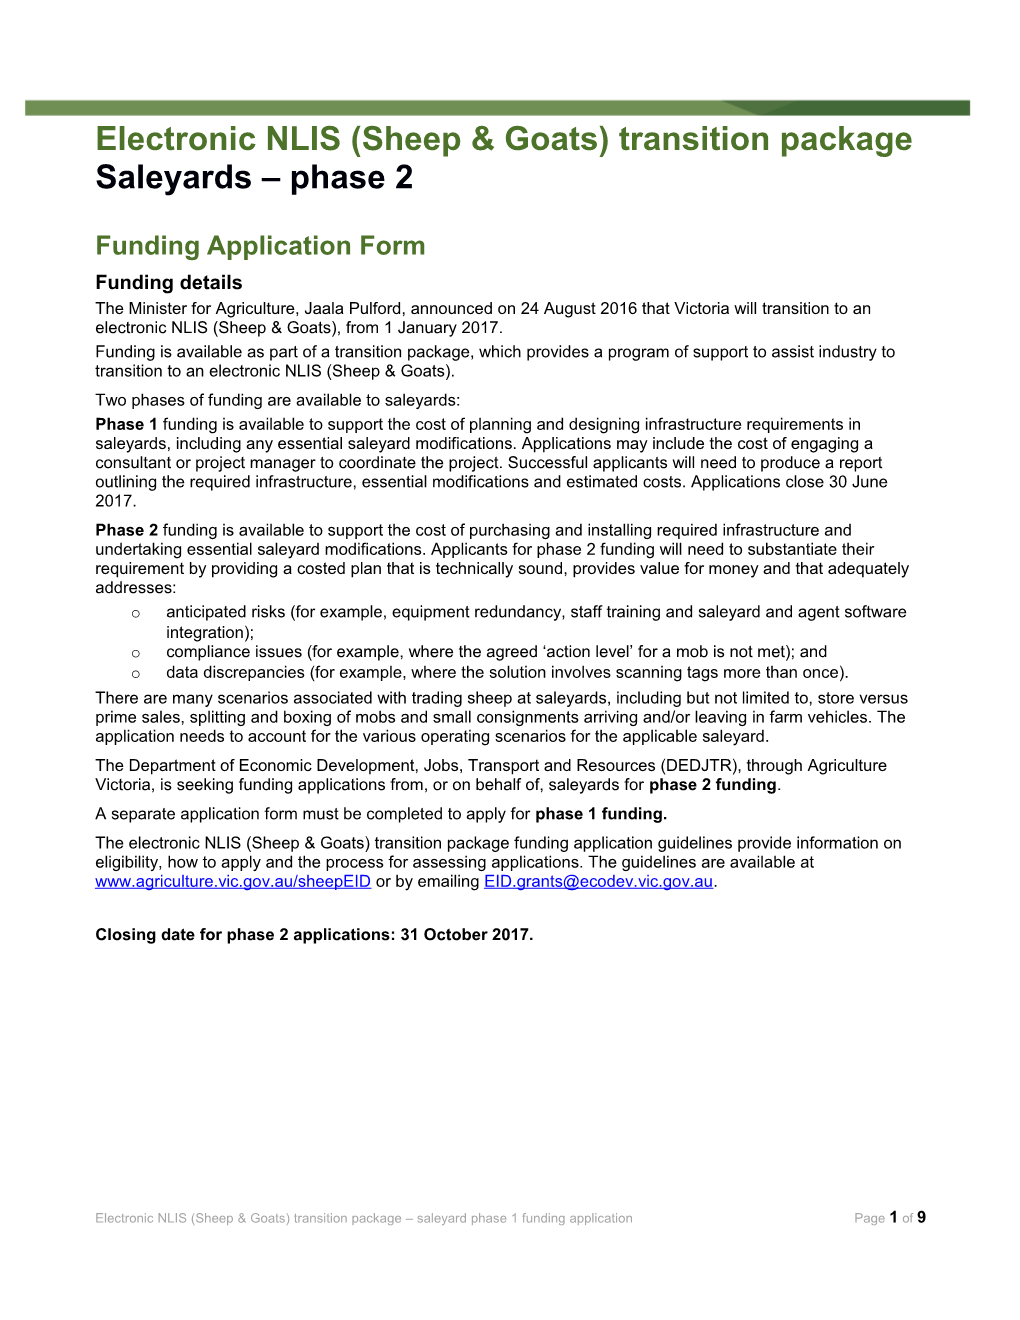 Electronicnlis (Sheep & Goats) Transition Package Saleyards Phase 2